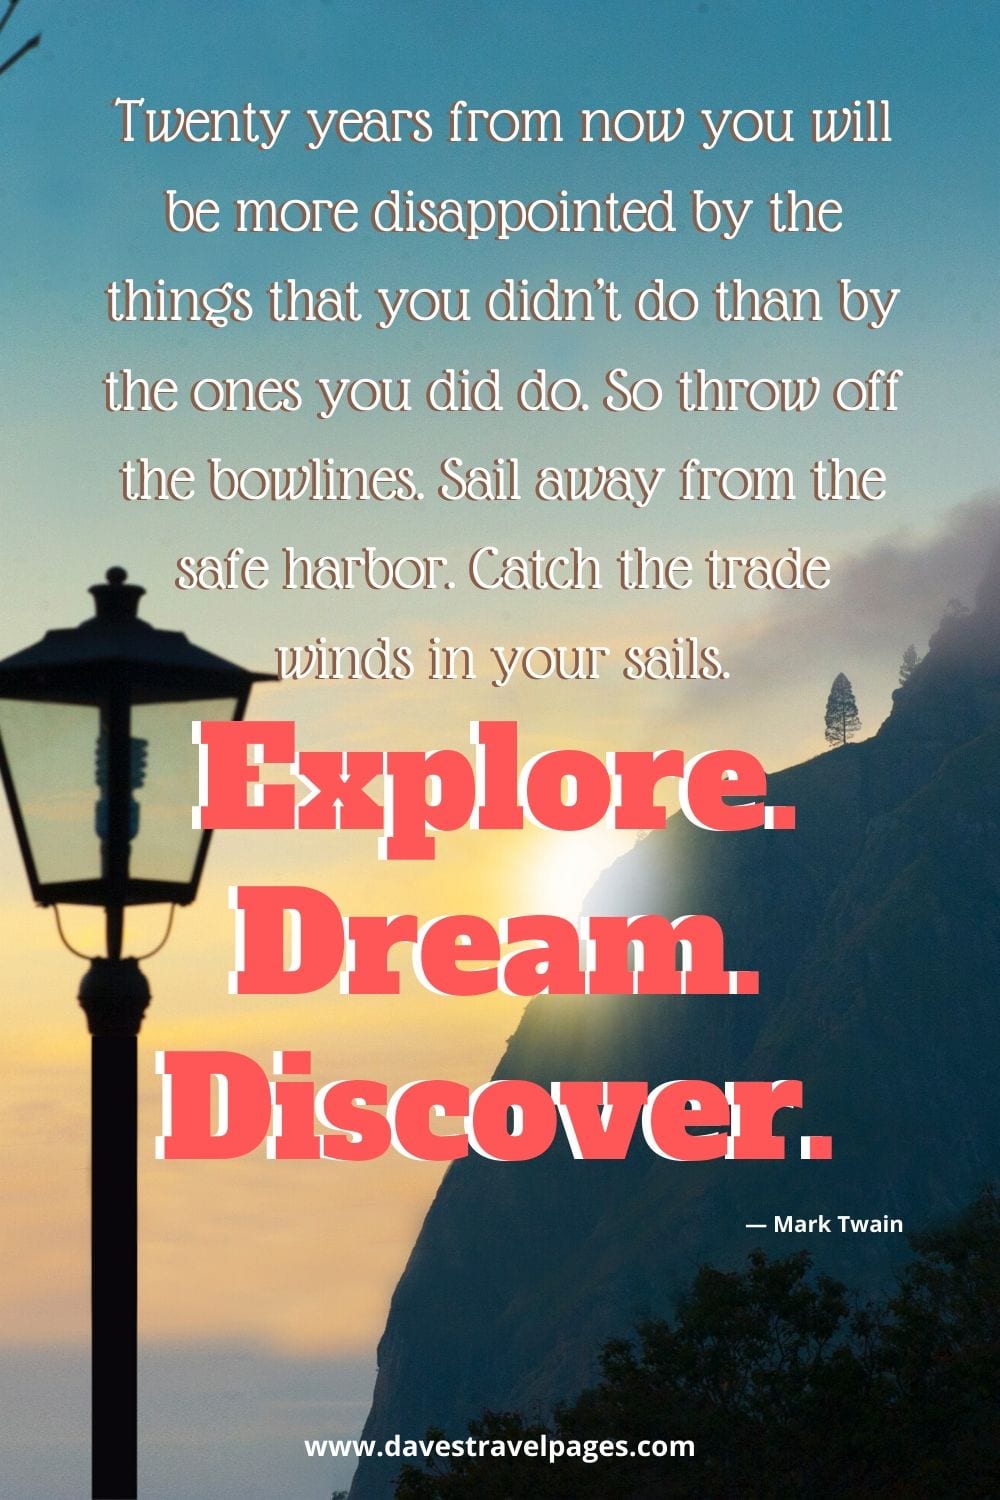 Twenty years from now you will be more disappointed by the things that you didn’t do than by the ones you did do. So throw off the bowlines. Sail away from the safe harbor. Catch the trade winds in your sails. Explore. Dream. Discover.”― Mark Twain Quote